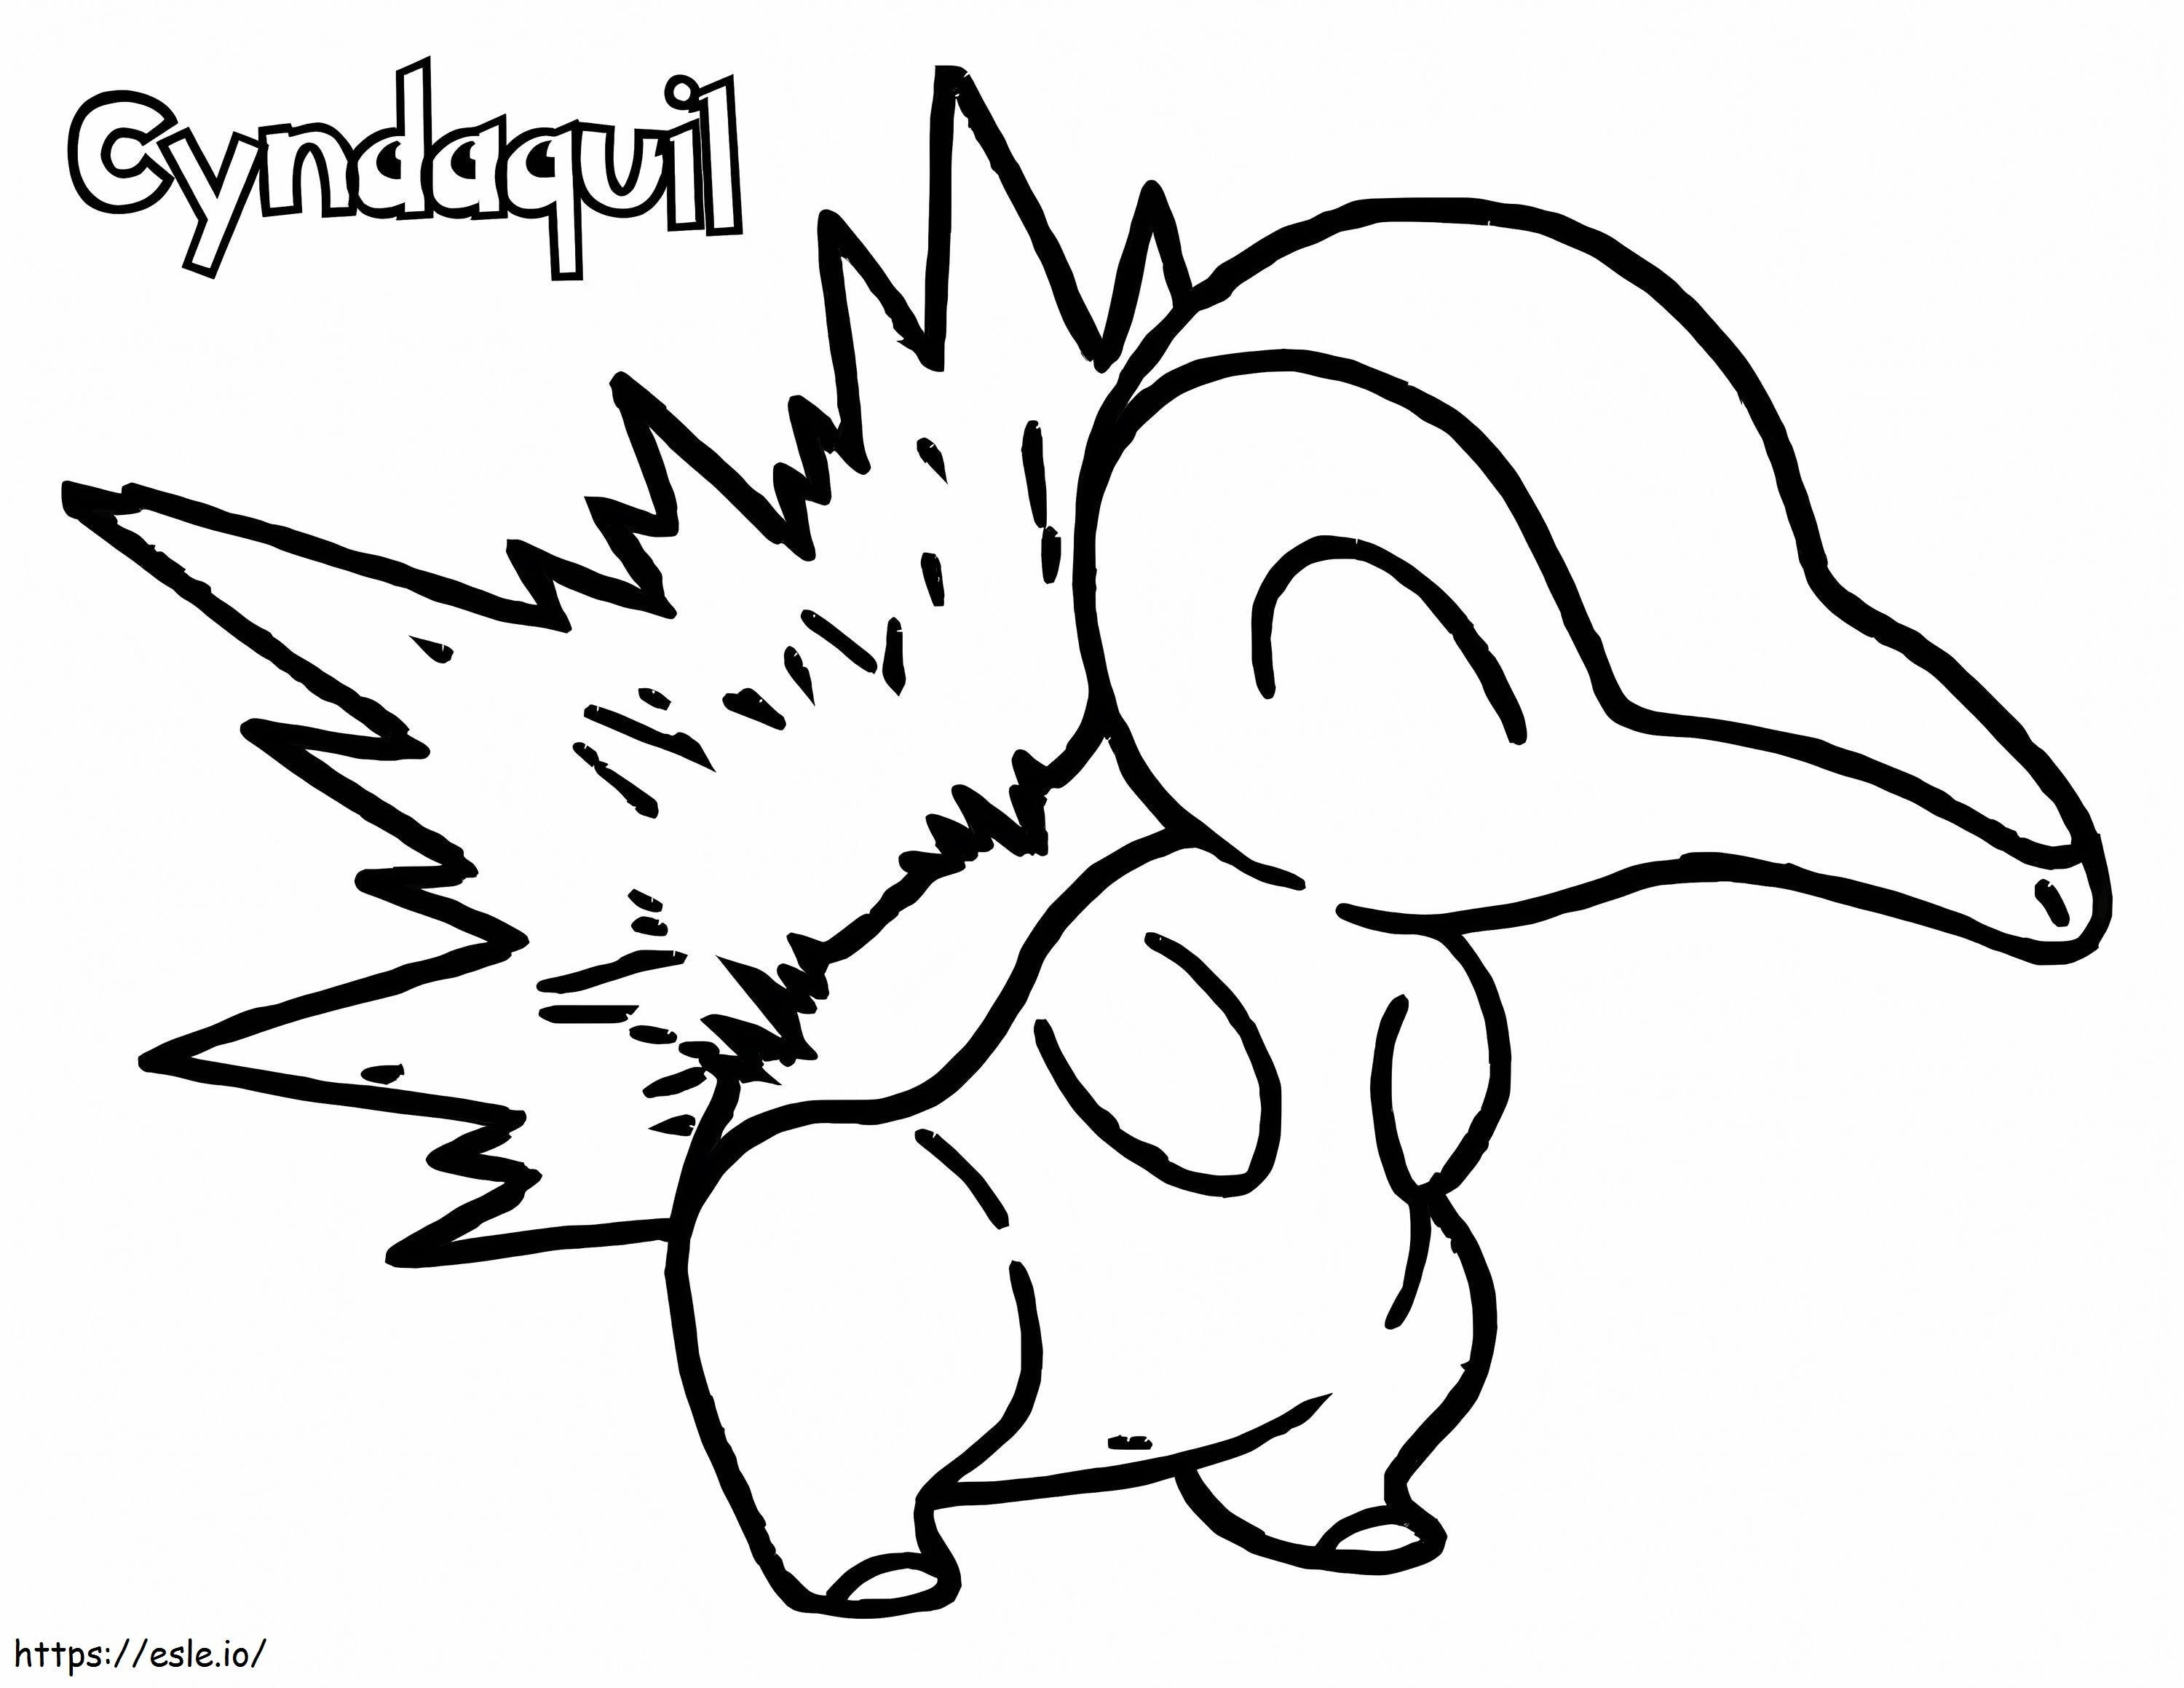 Cyndaquil A Pokemon coloring page